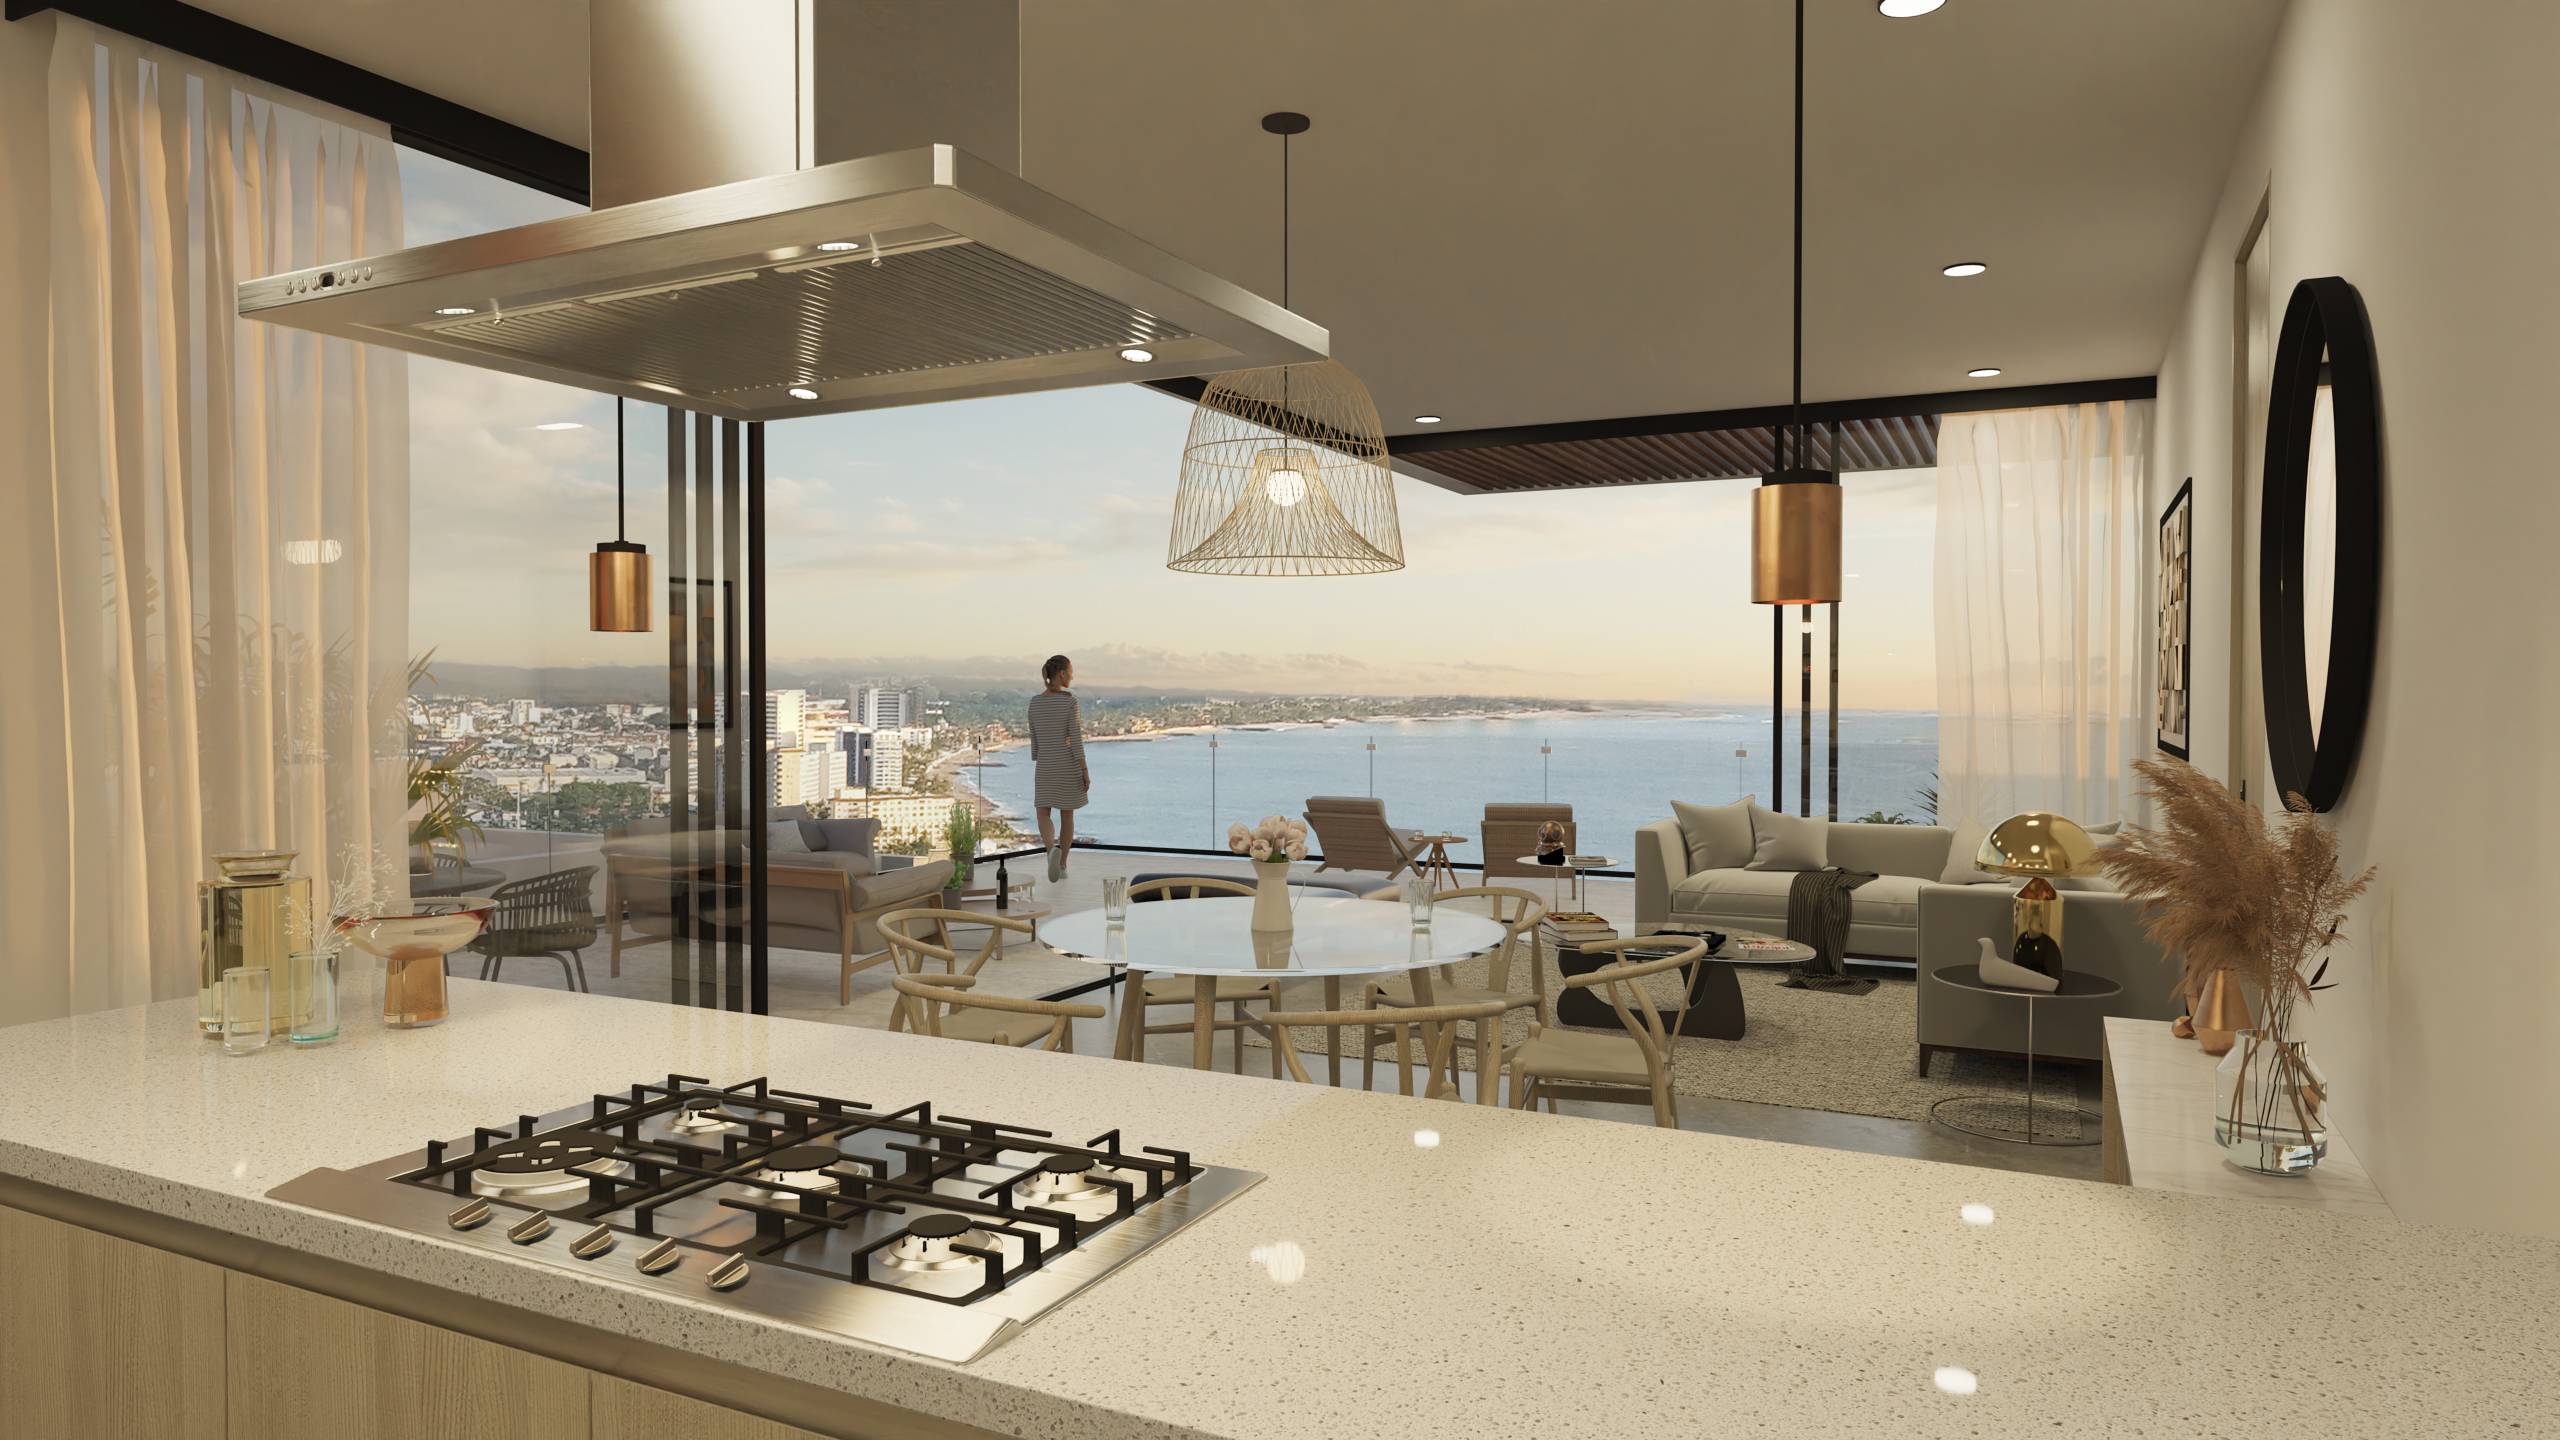 Introducing Penthouse 1 - An Epitome of Luxury and Serenity in the Vibrant Heart of Puerto Vallarta.